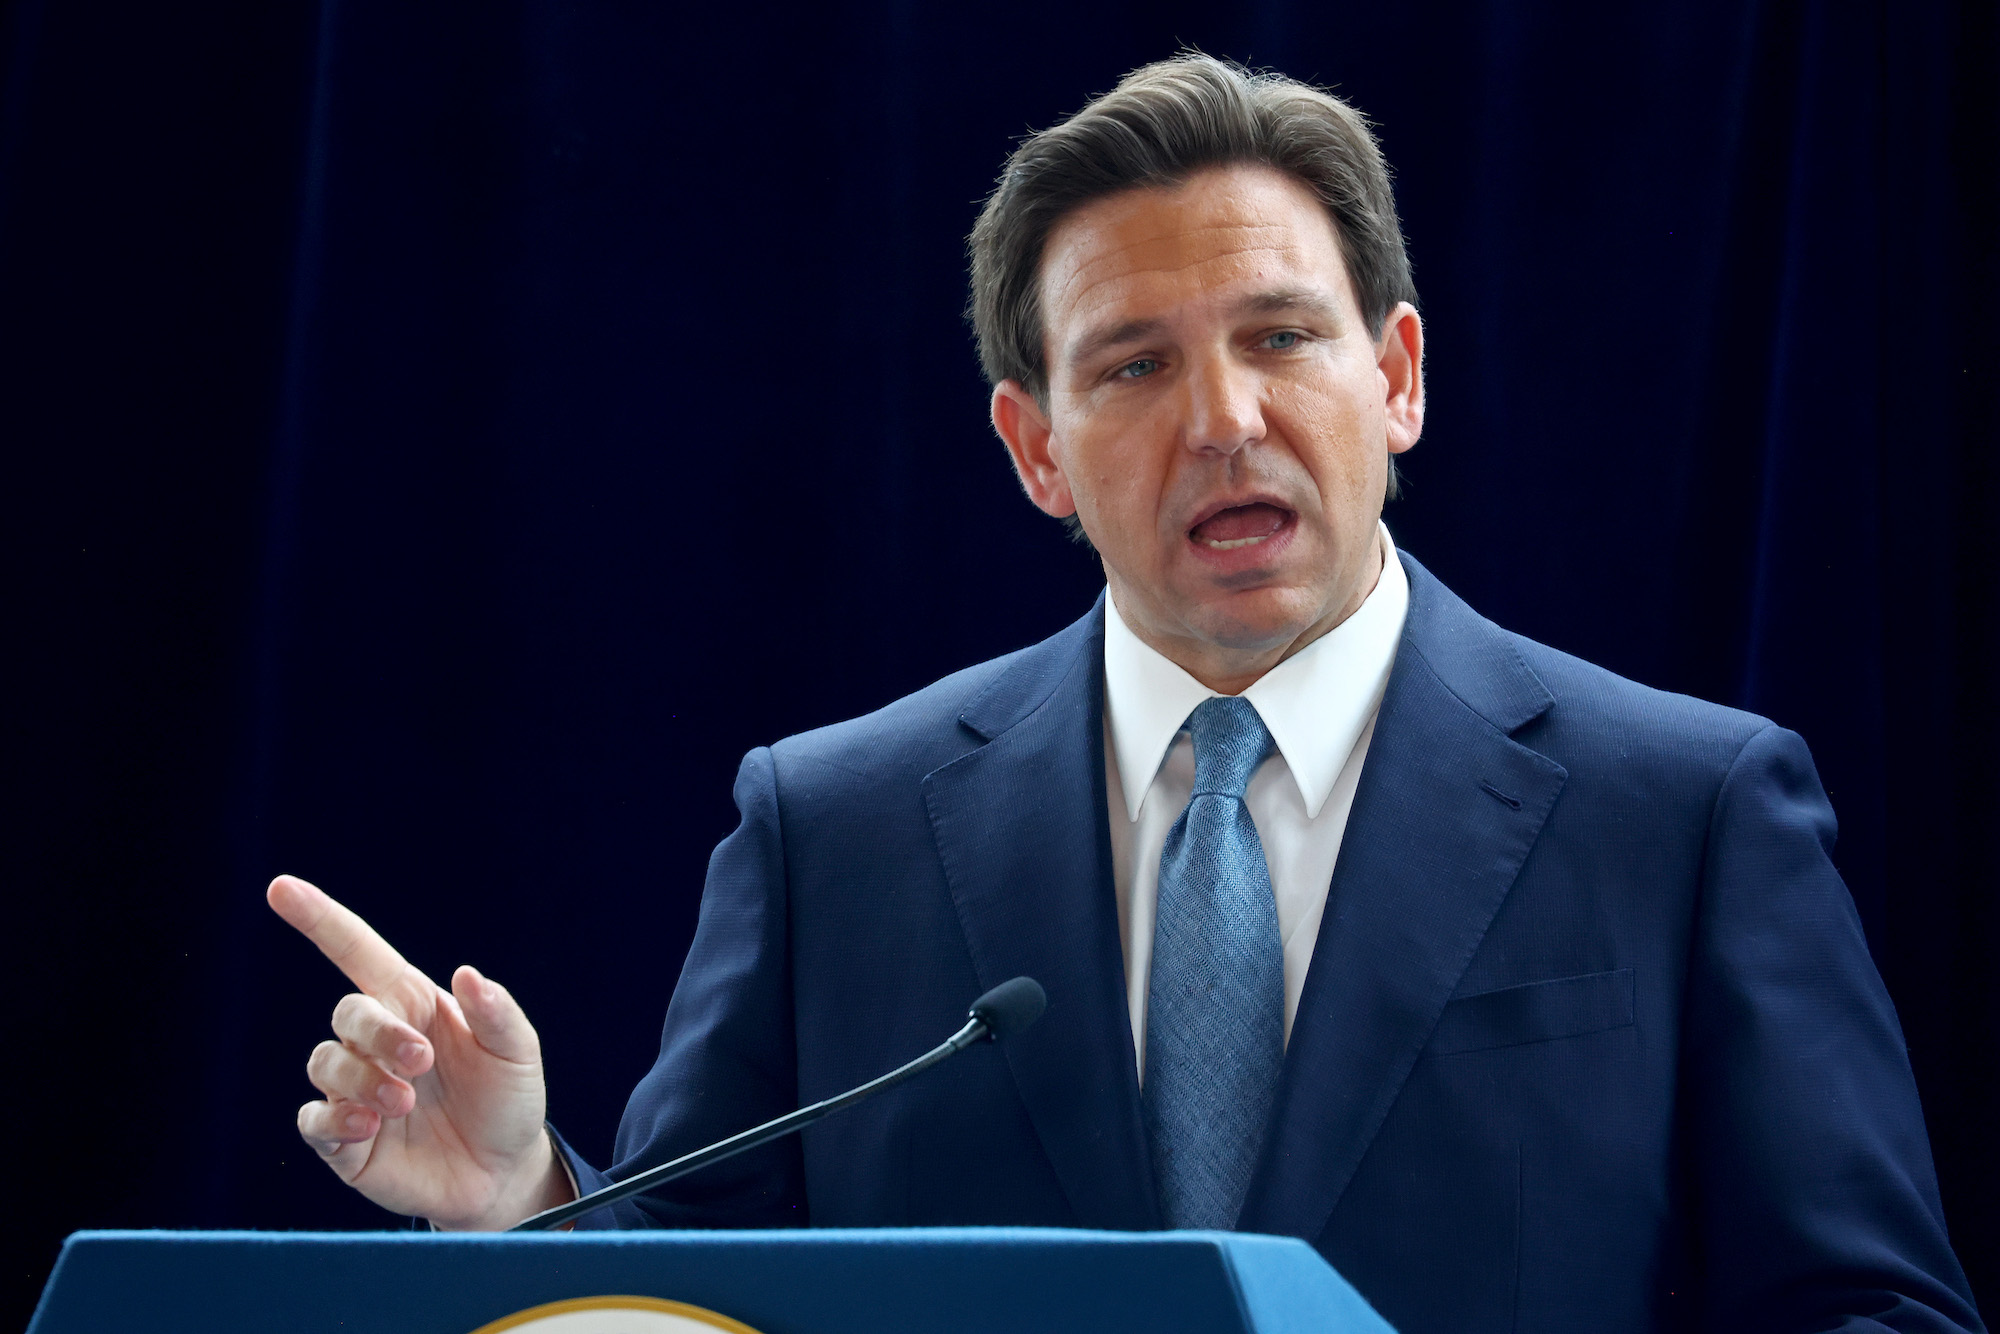 Florida Gov. Ron DeSantis speaks at the Ronald Reagan Presidential Library in Simi Valley, California, on Mach 5.